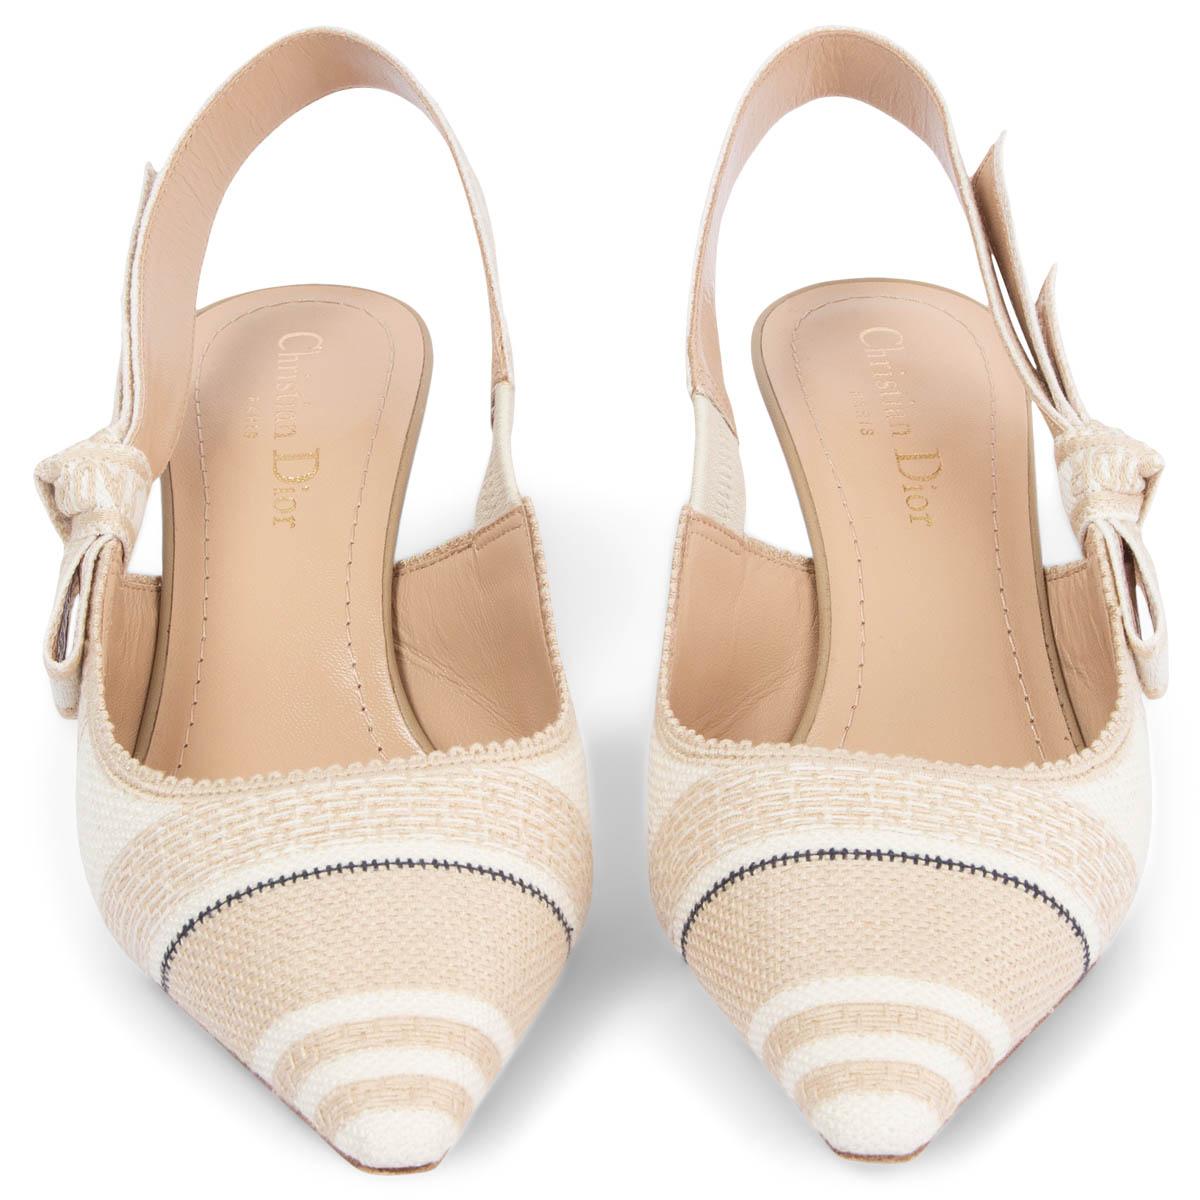 100% authentic Christian Dior 2020 J'Adior striped and embroidered slingback's in light beige and off-white cotton and linen canvas. Featuring cotton logo ribbon sling, beige leather heel and nude leather lining. Have been worn and are in excellent